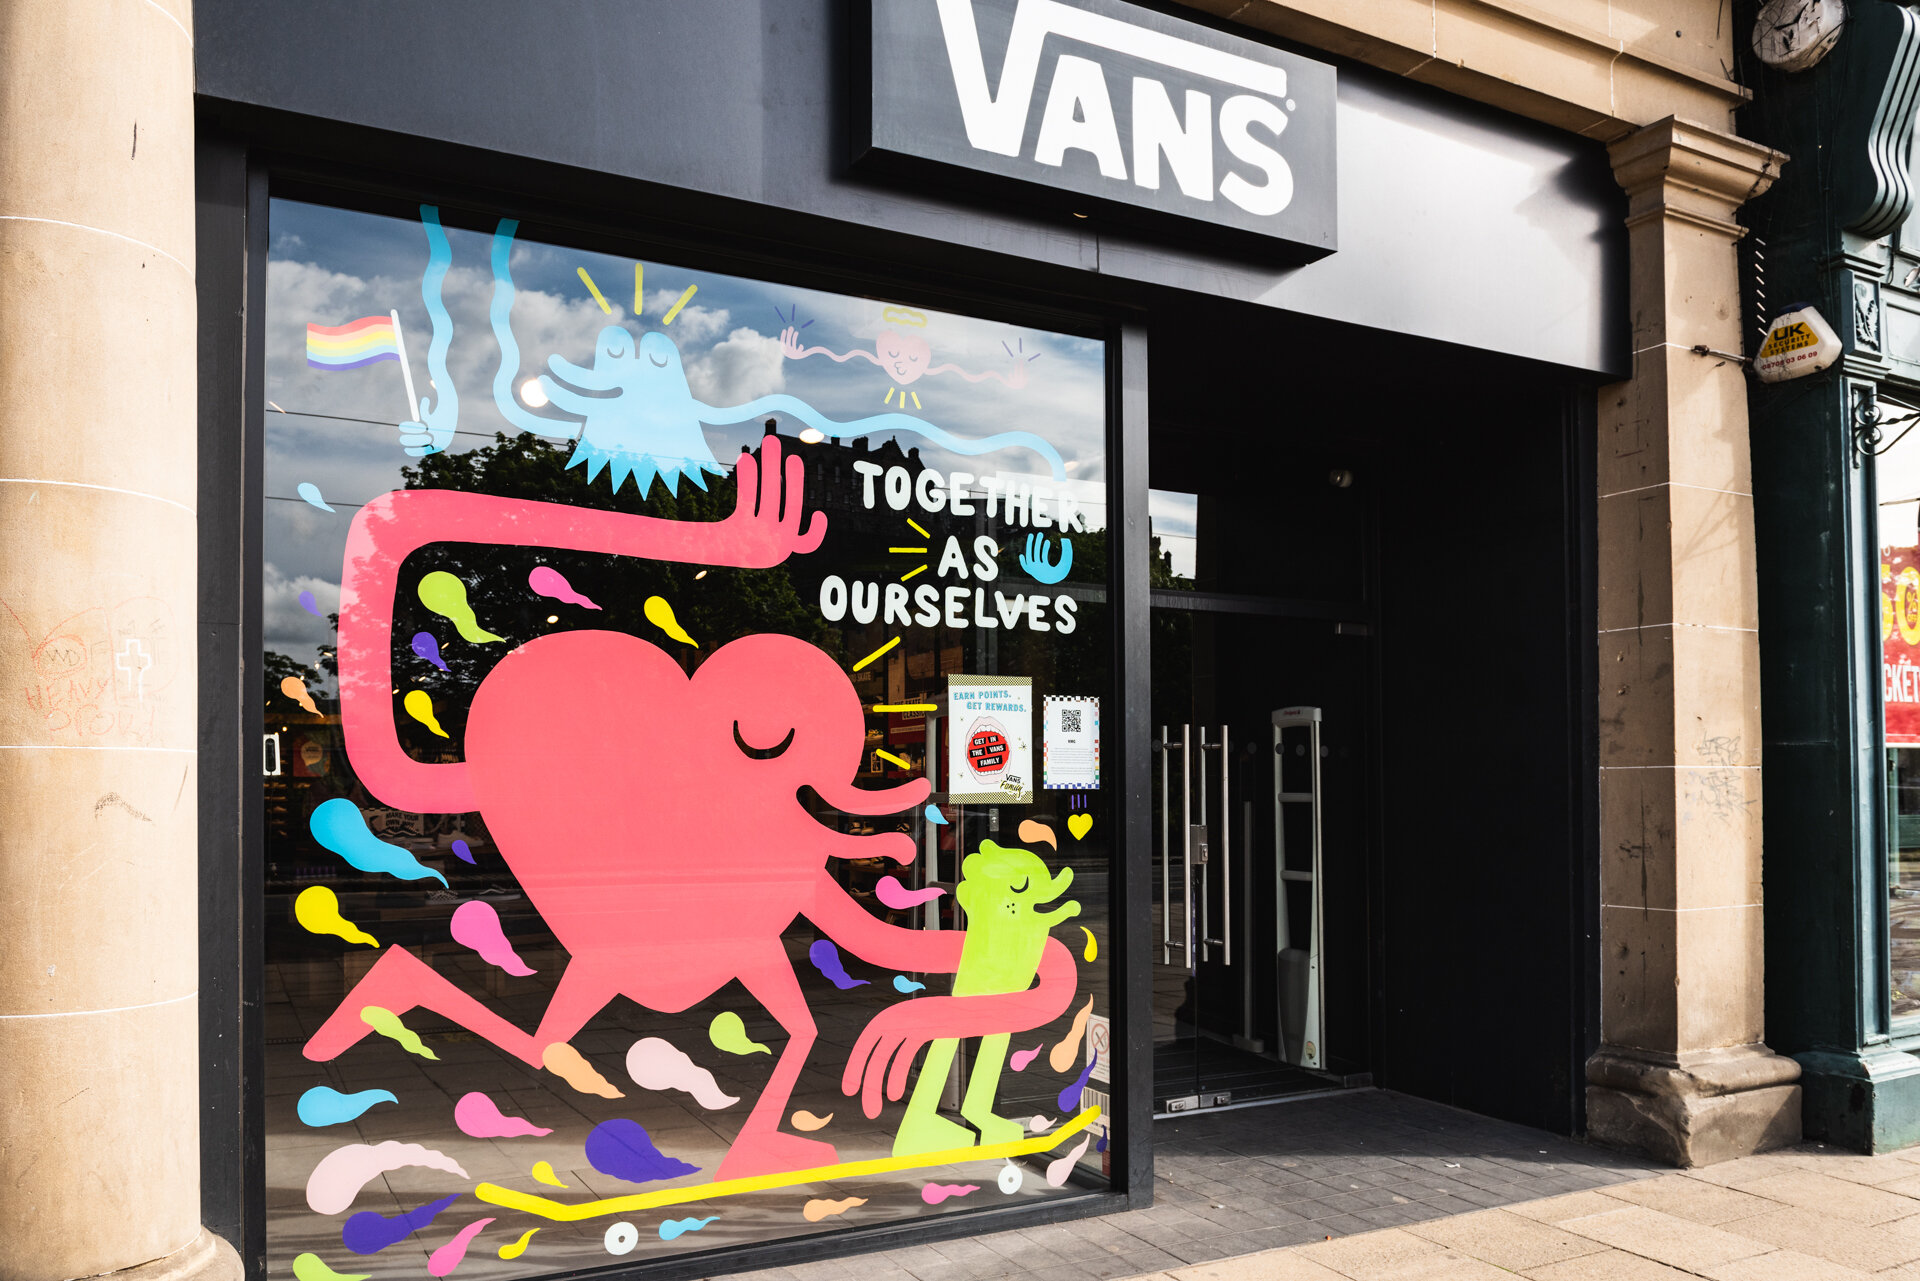 Vans Ourselves —